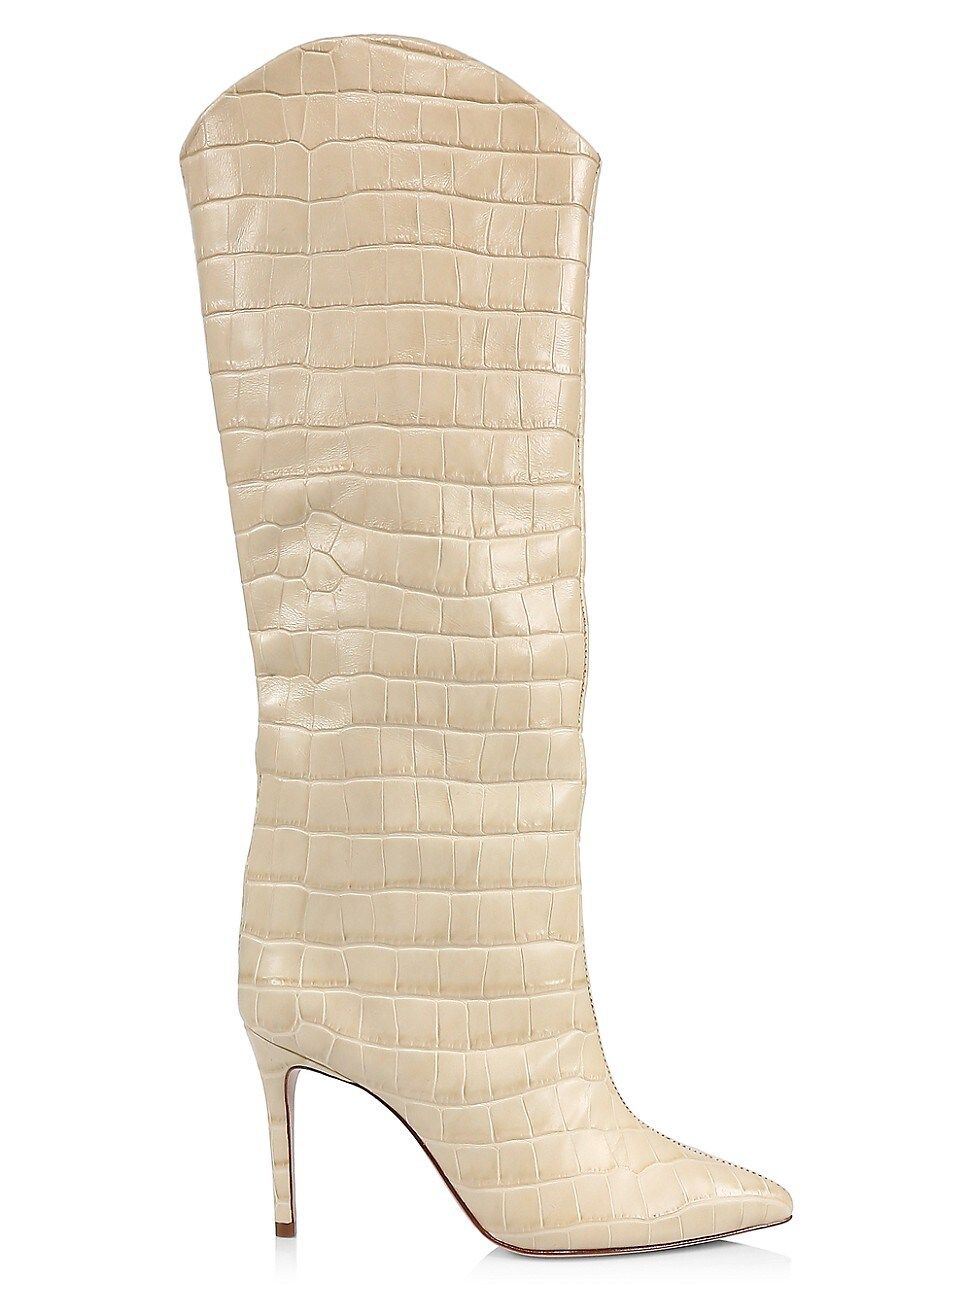 Schutz Women's Maryana Knee-High Croc-Embossed Leather Boots - Off White - Size 5 | Saks Fifth Avenue